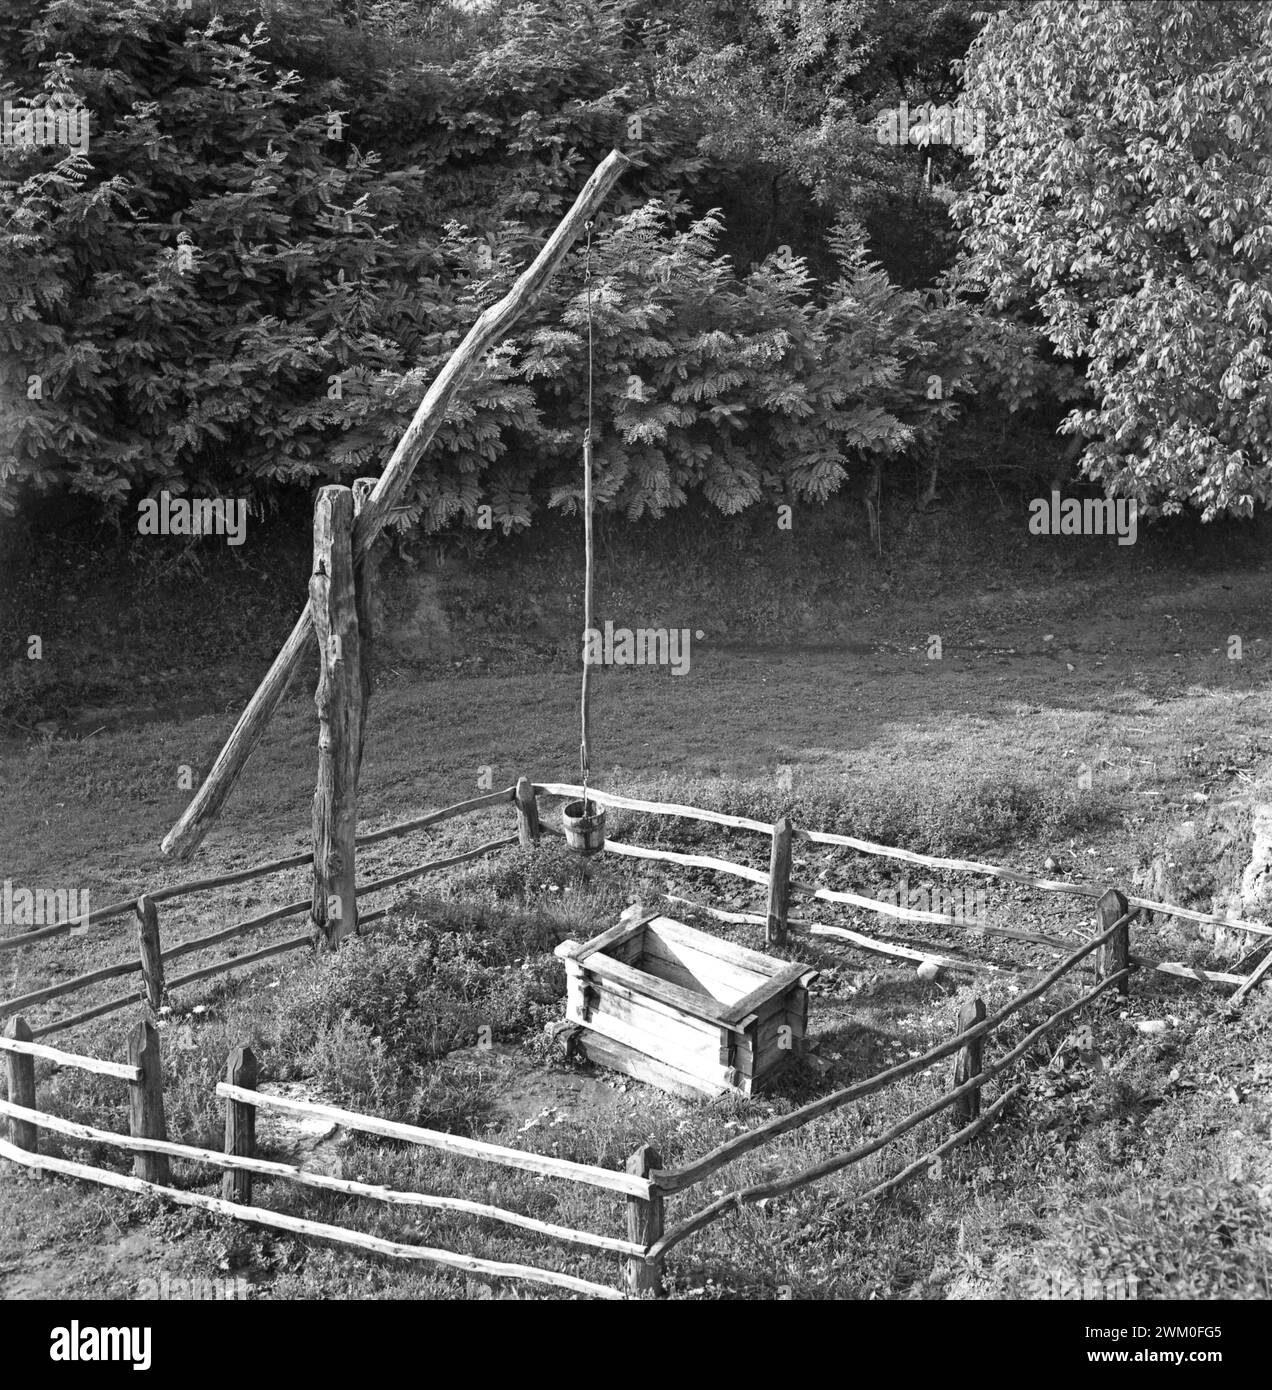 Vrancea County, Romania, approx. 1975. Water well with a shadoof on a rural property. Stock Photo